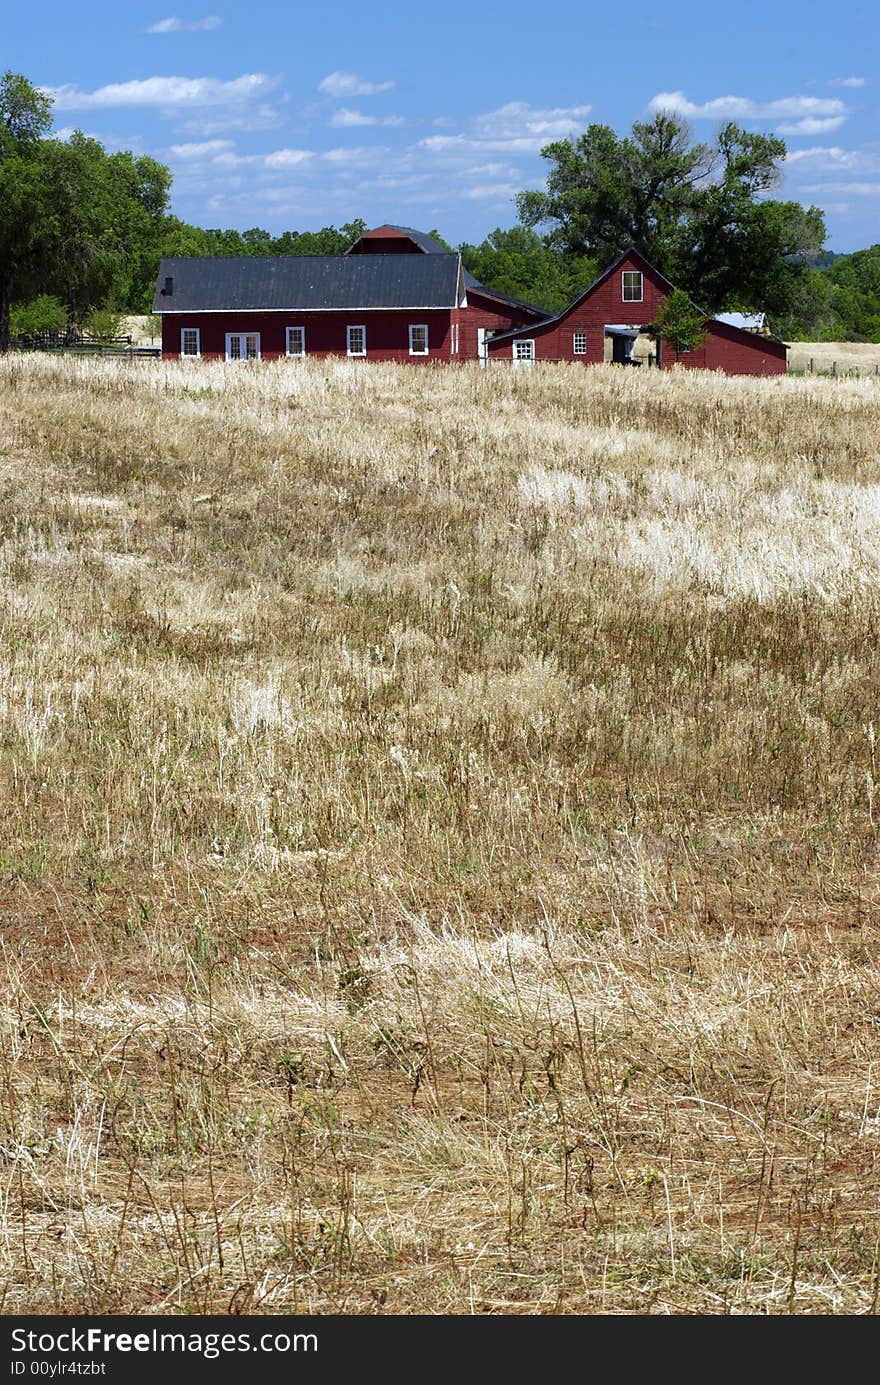 A Red Barn and farmhouse sit in the middle of wheat and grain fields. A Red Barn and farmhouse sit in the middle of wheat and grain fields